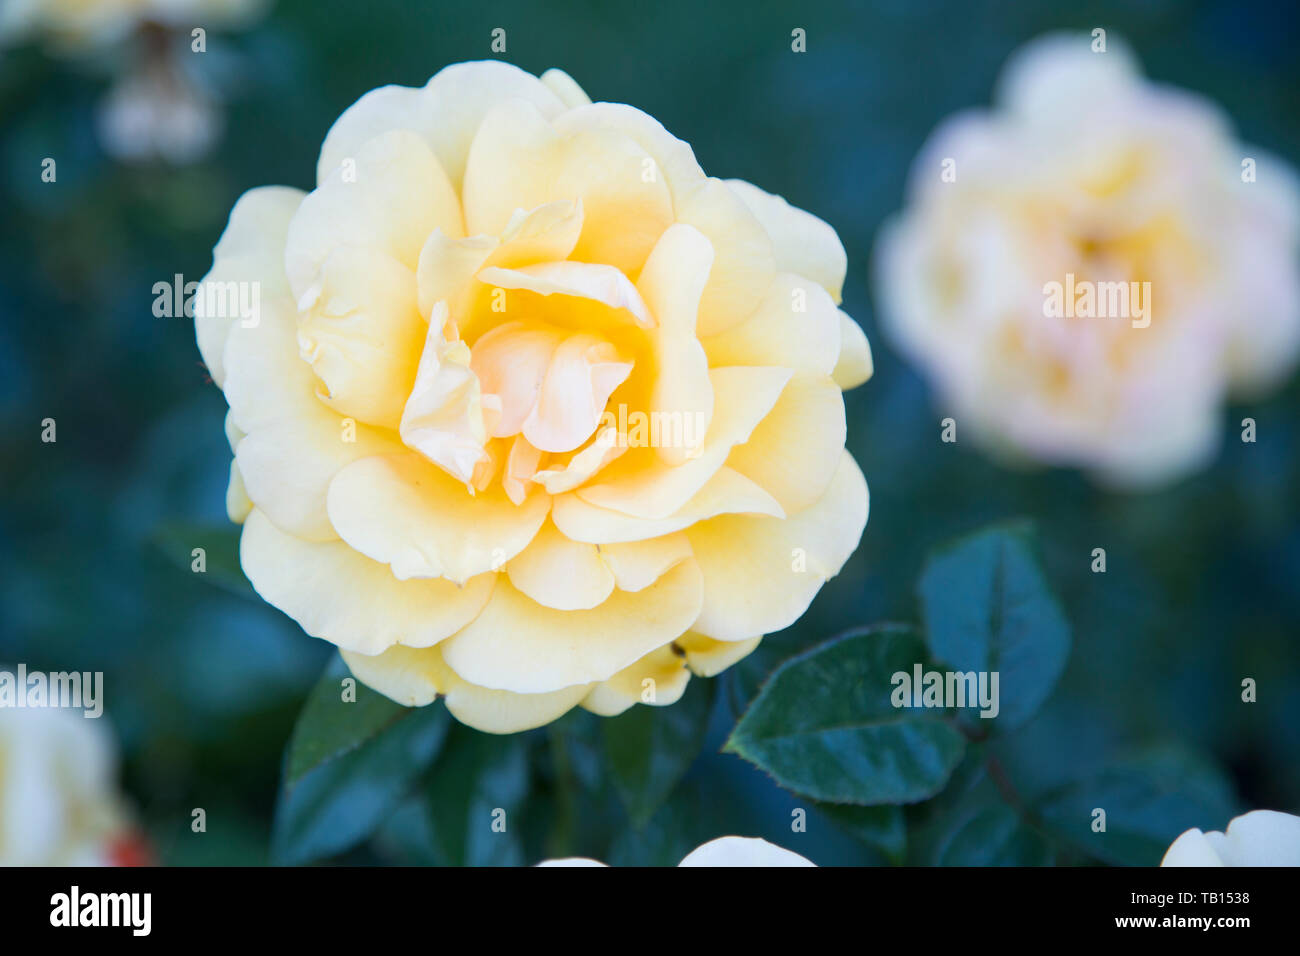 Closeup of yellow rose on bush, with other roses out of focus in background. Stock Photo